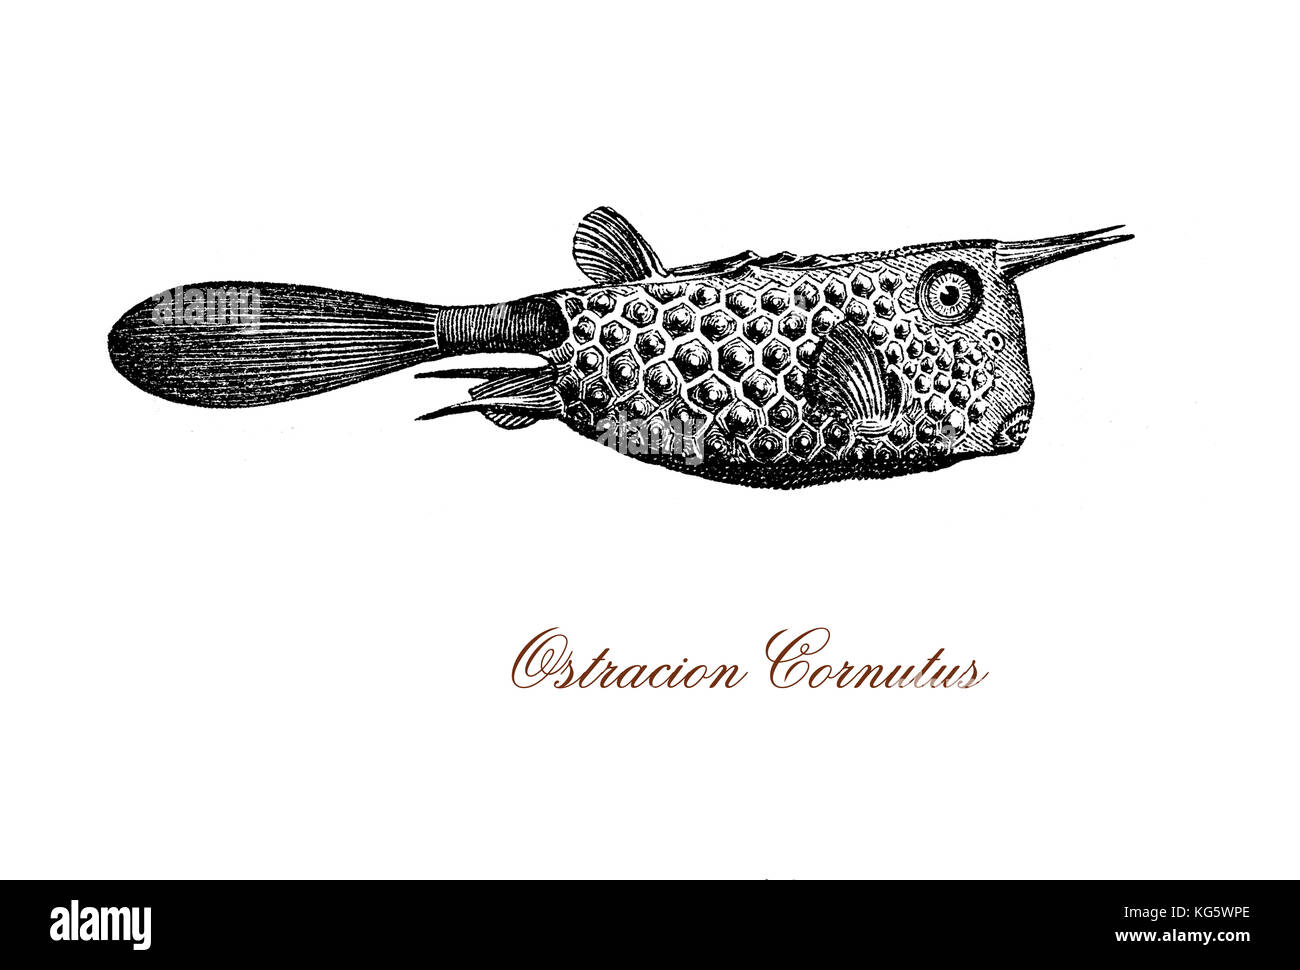 Vintage engraving of ostracion-cornutus or longhorn cowfish, tropical fish of the Great Barrier Reef and Coral Sea that inhabits muddy, sandy still bays, dried to make ornaments Stock Photo